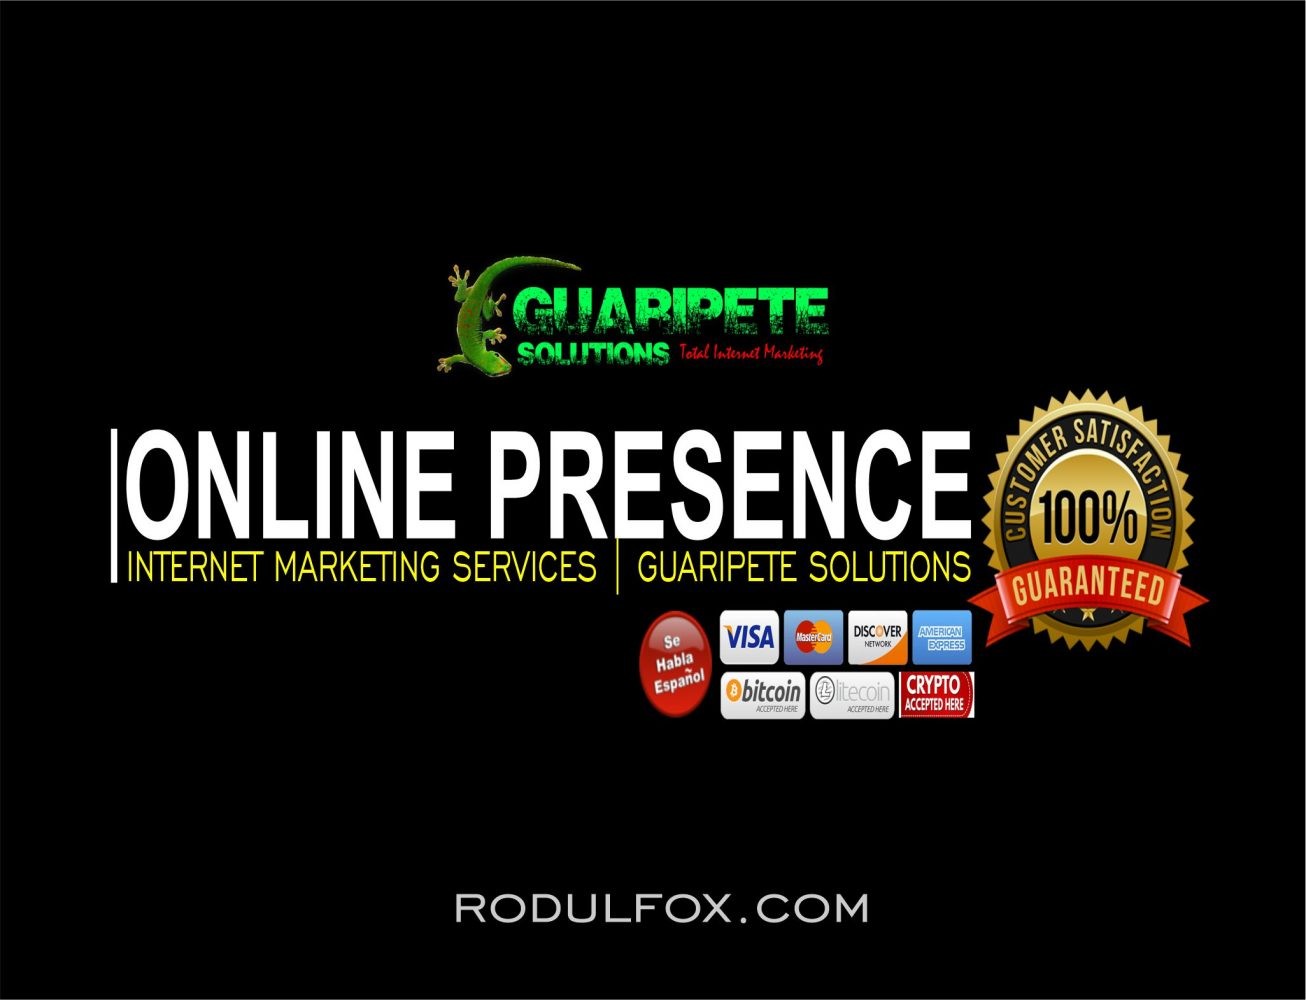 Internet Marketing and Online Presence Services by Guaripete Solutions